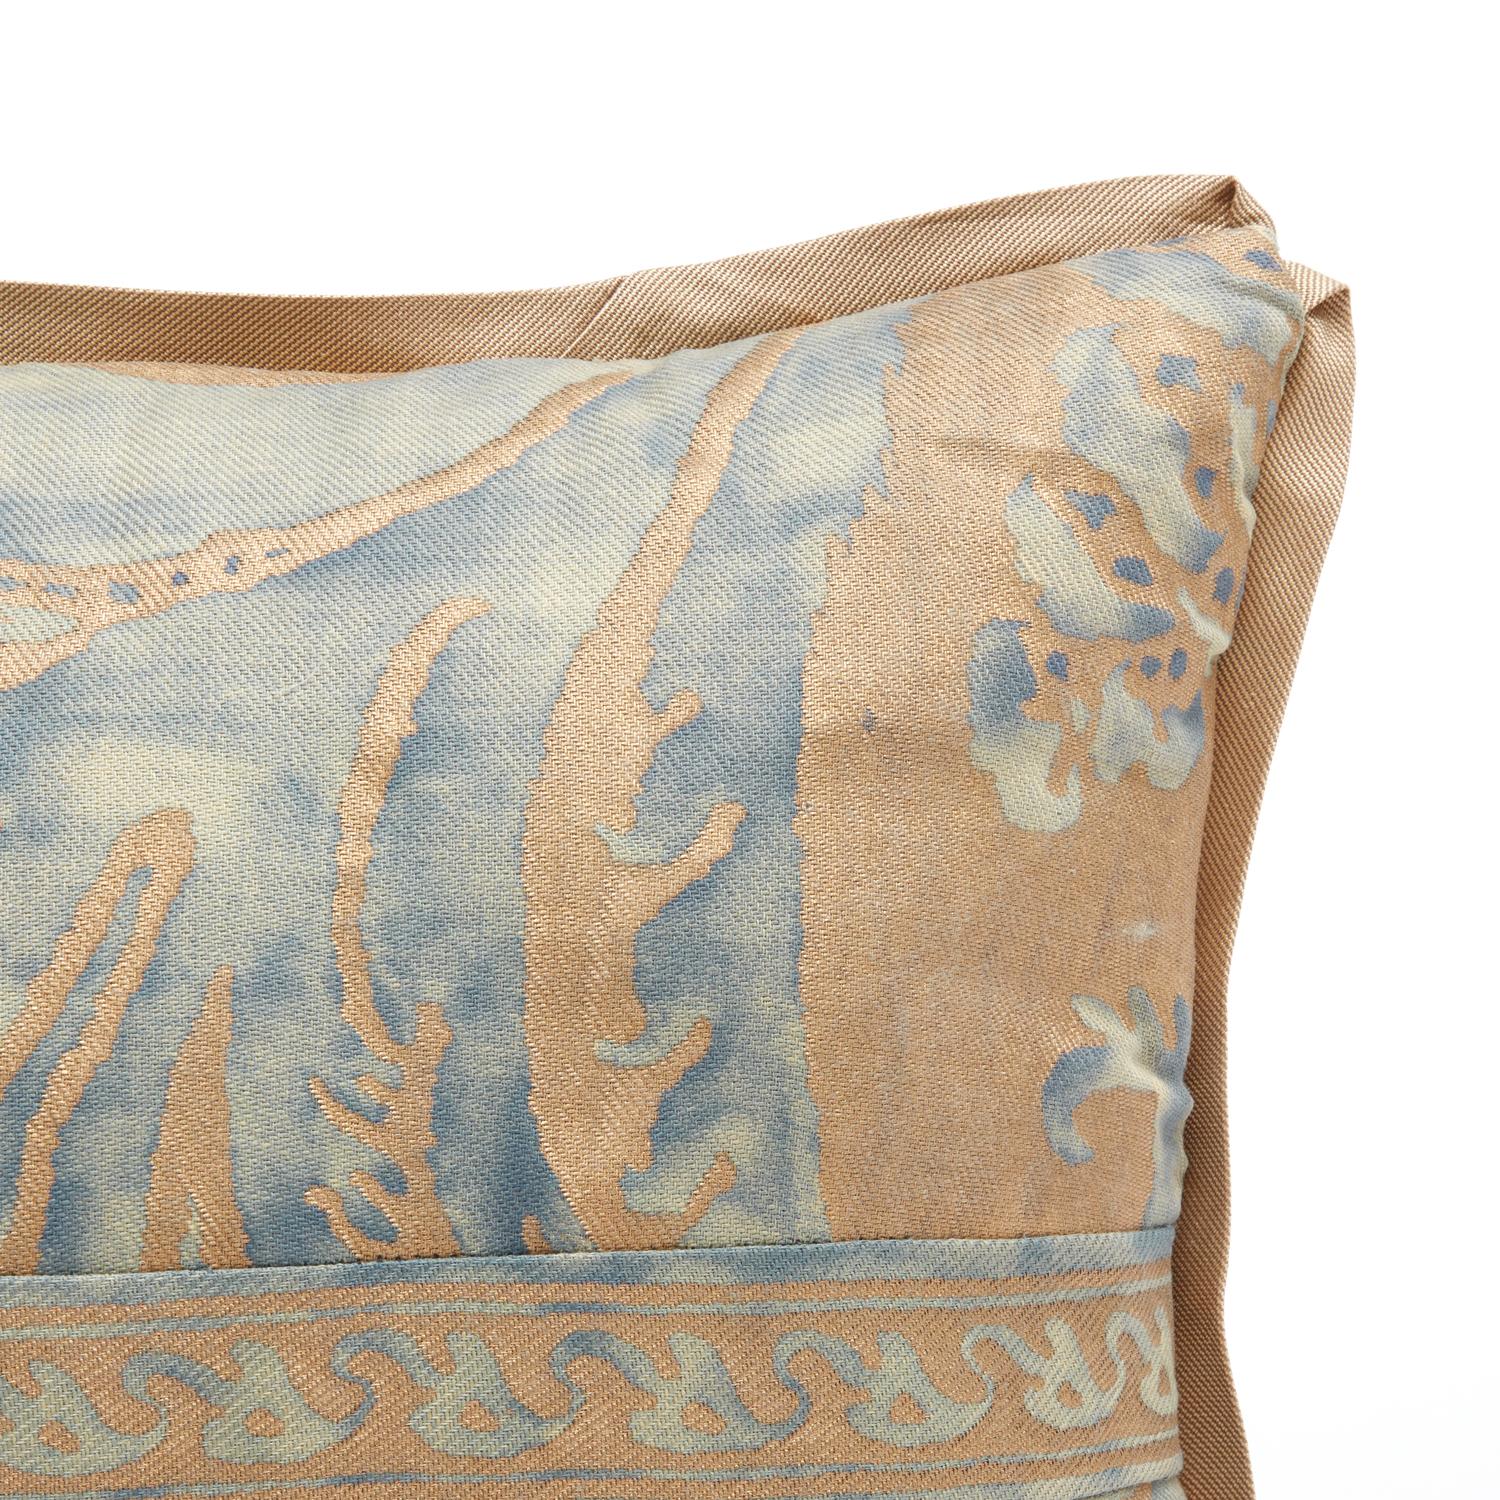 A rectangular Fortuny fabric cushion in the Glicine pattern, with self pattern gallon border detail and bias gold silk edge trim. Gold silk back. 

50 down/50 feather insert. Newly made using vintage Fortuny fabric. This cushion is one of a kind.